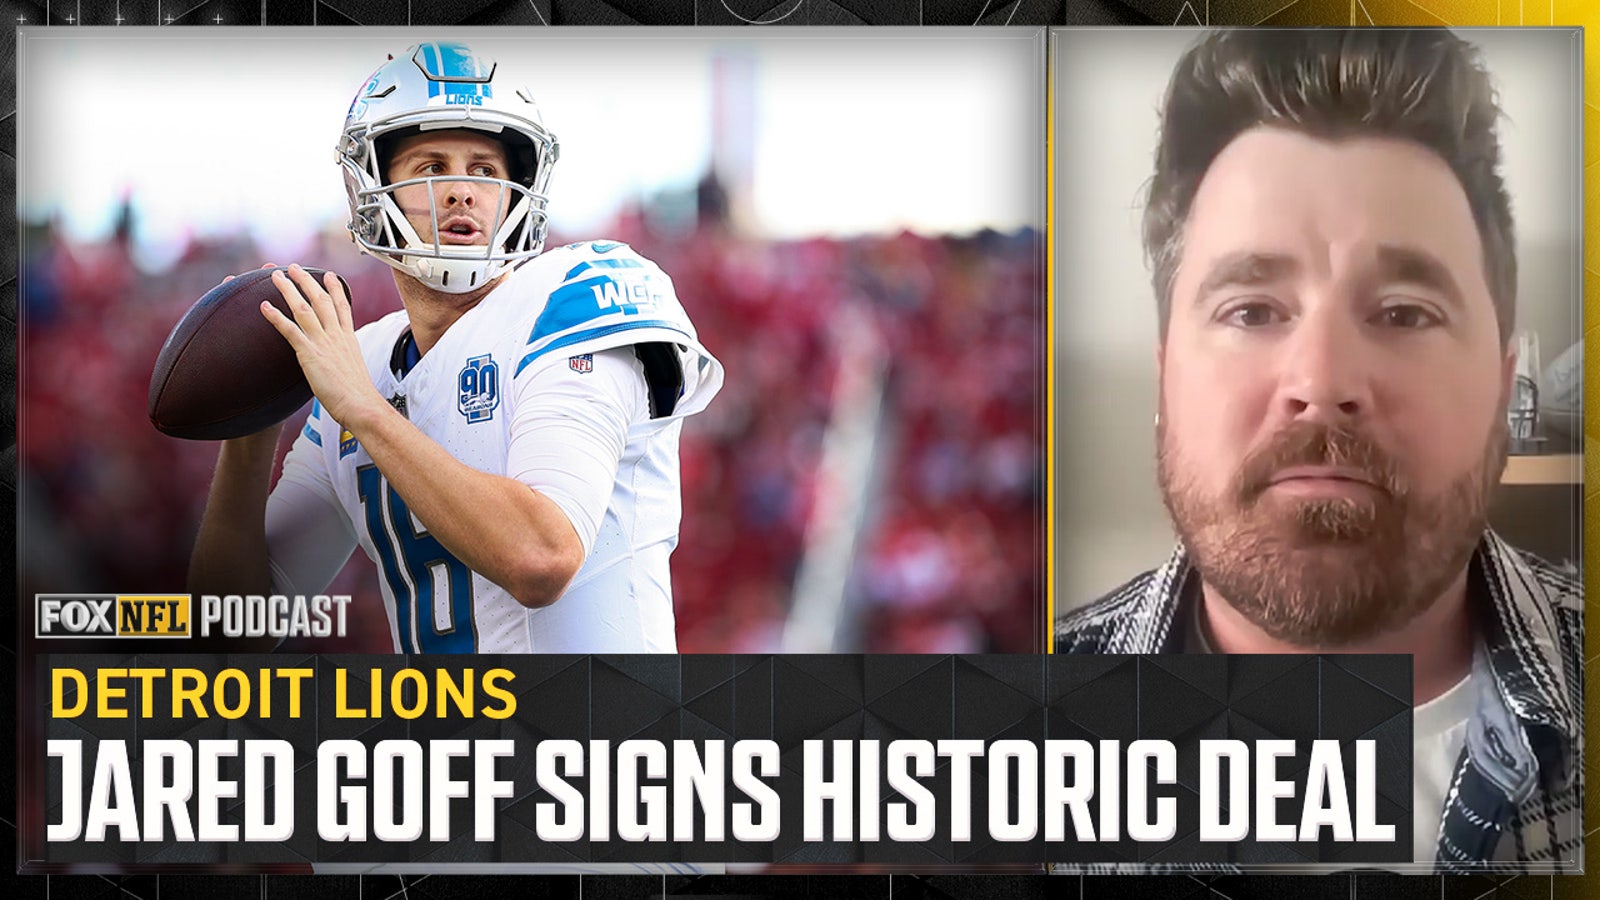 Dave Helman reacts to the Lions' huge decision to extend Jared Goff's contract